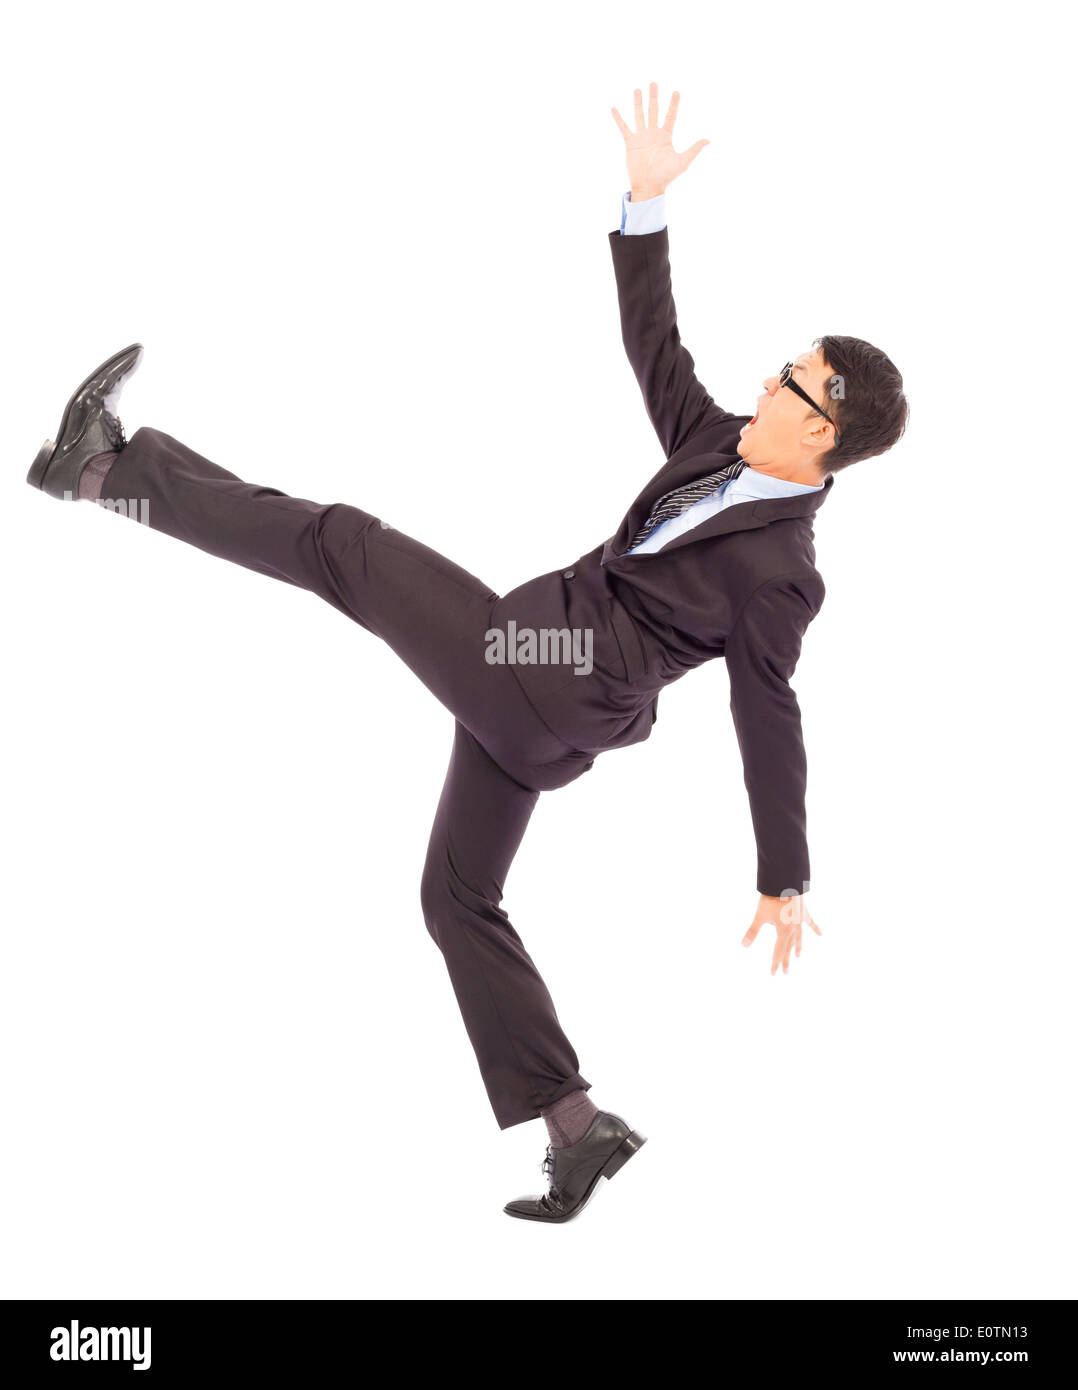 businessman slip and fall and a funny pose Stock Photo